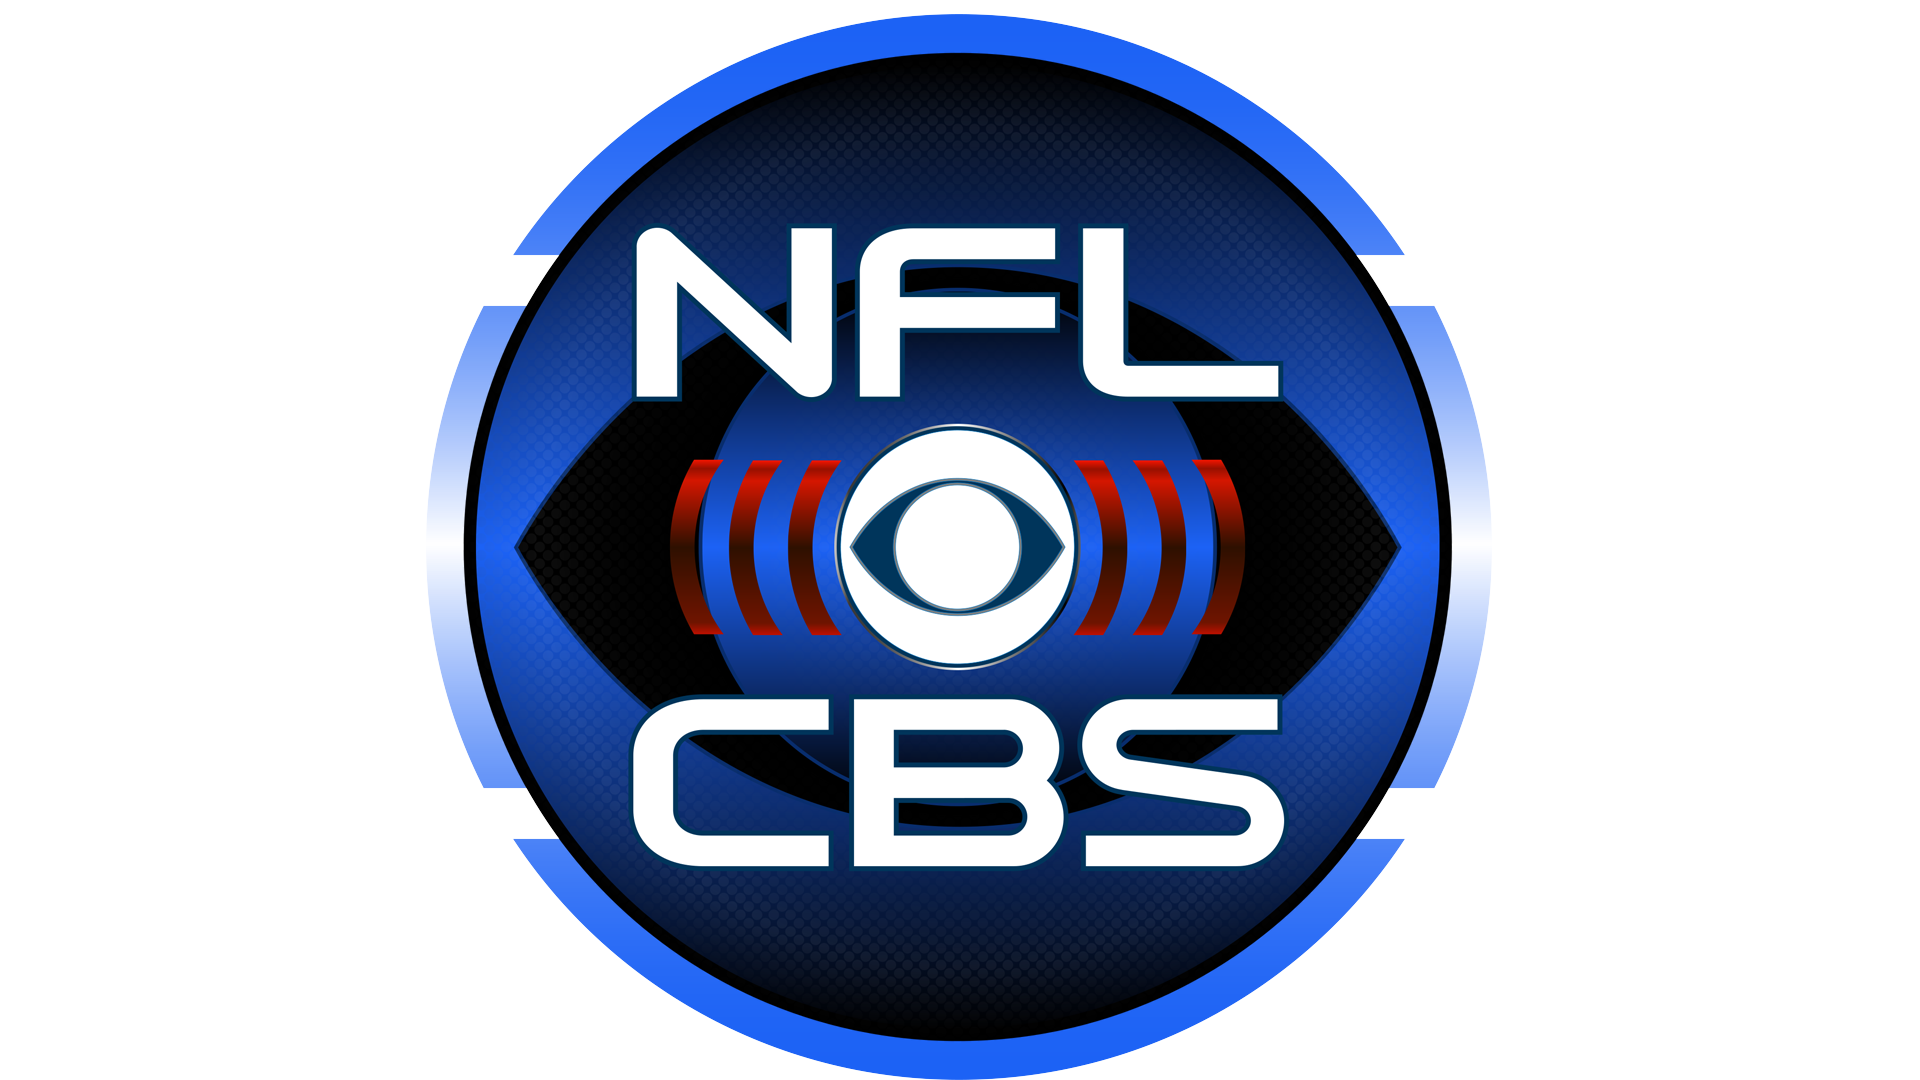 CBS All Access To Stream NFL Games Through 2022 on All Mobile Devices